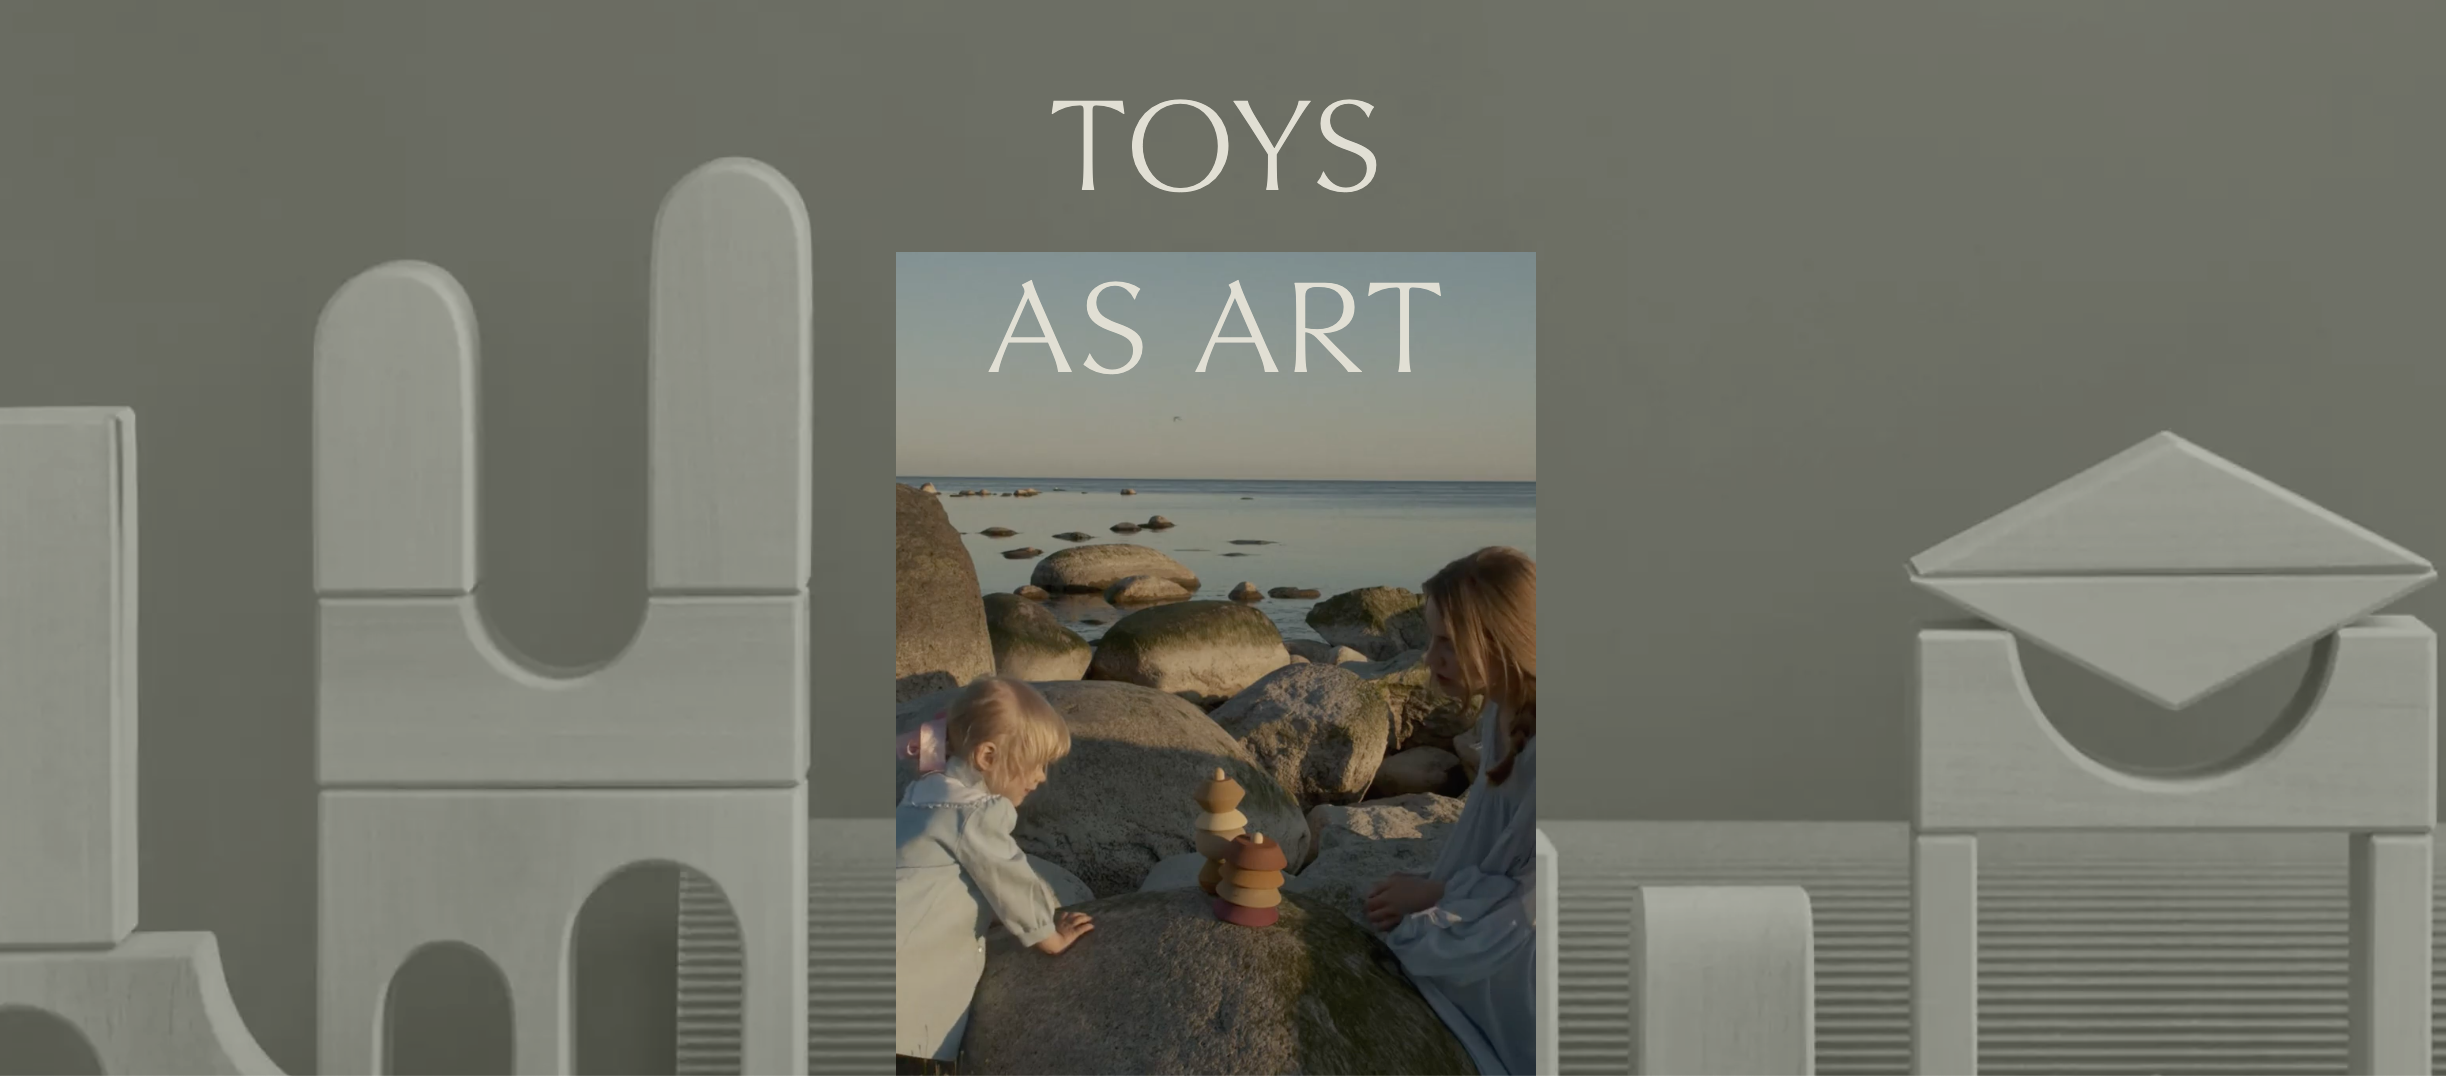 Just look at these toys, which can serve as art too. 